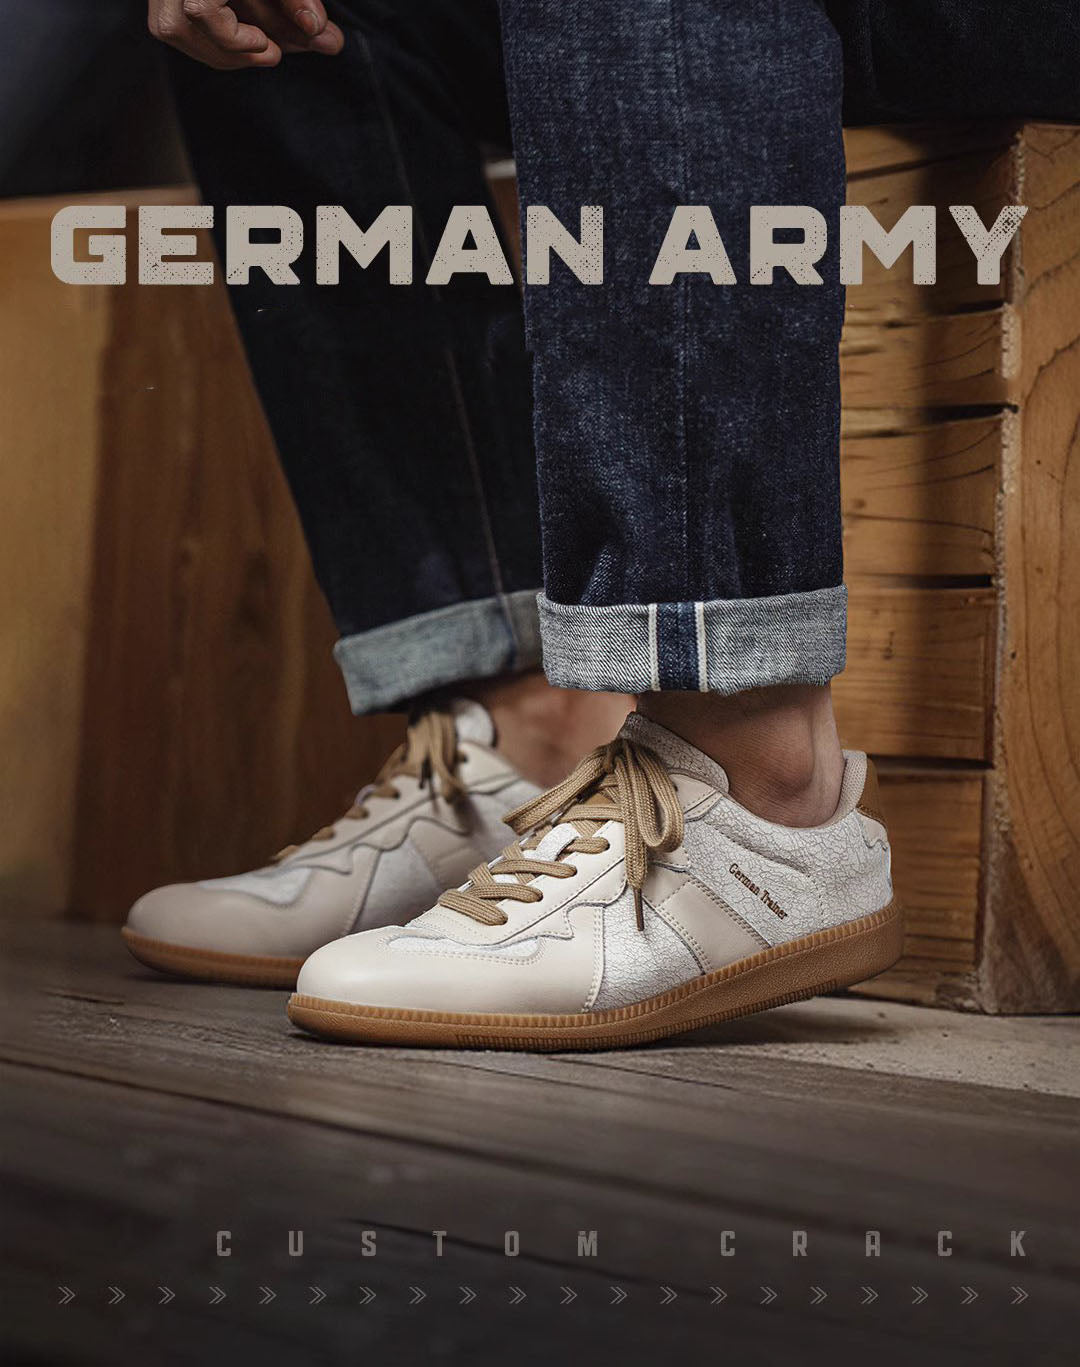 German Army Retro Cracked Moral White Versatile Men's Casual Shoes - Harmony Gallery